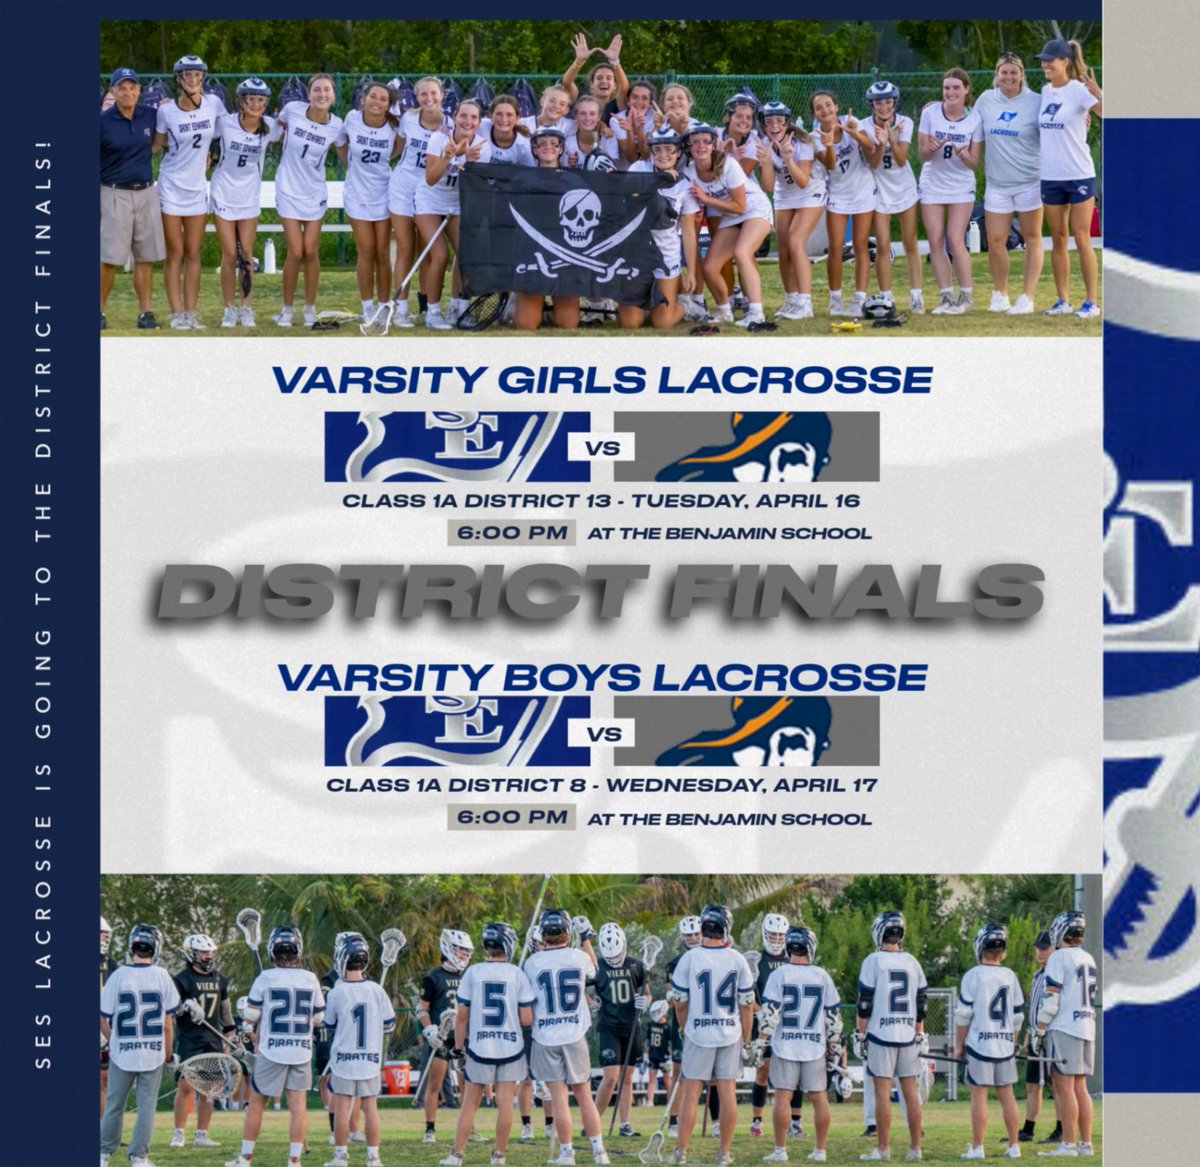 The SES Varsity Girls & Boys Lacrosse teams are both traveling to Benjamin this week for their District Finals games. The girls play on 4/16, and the boys play on 4/17. Good luck to both teams! #LetsGoPirates